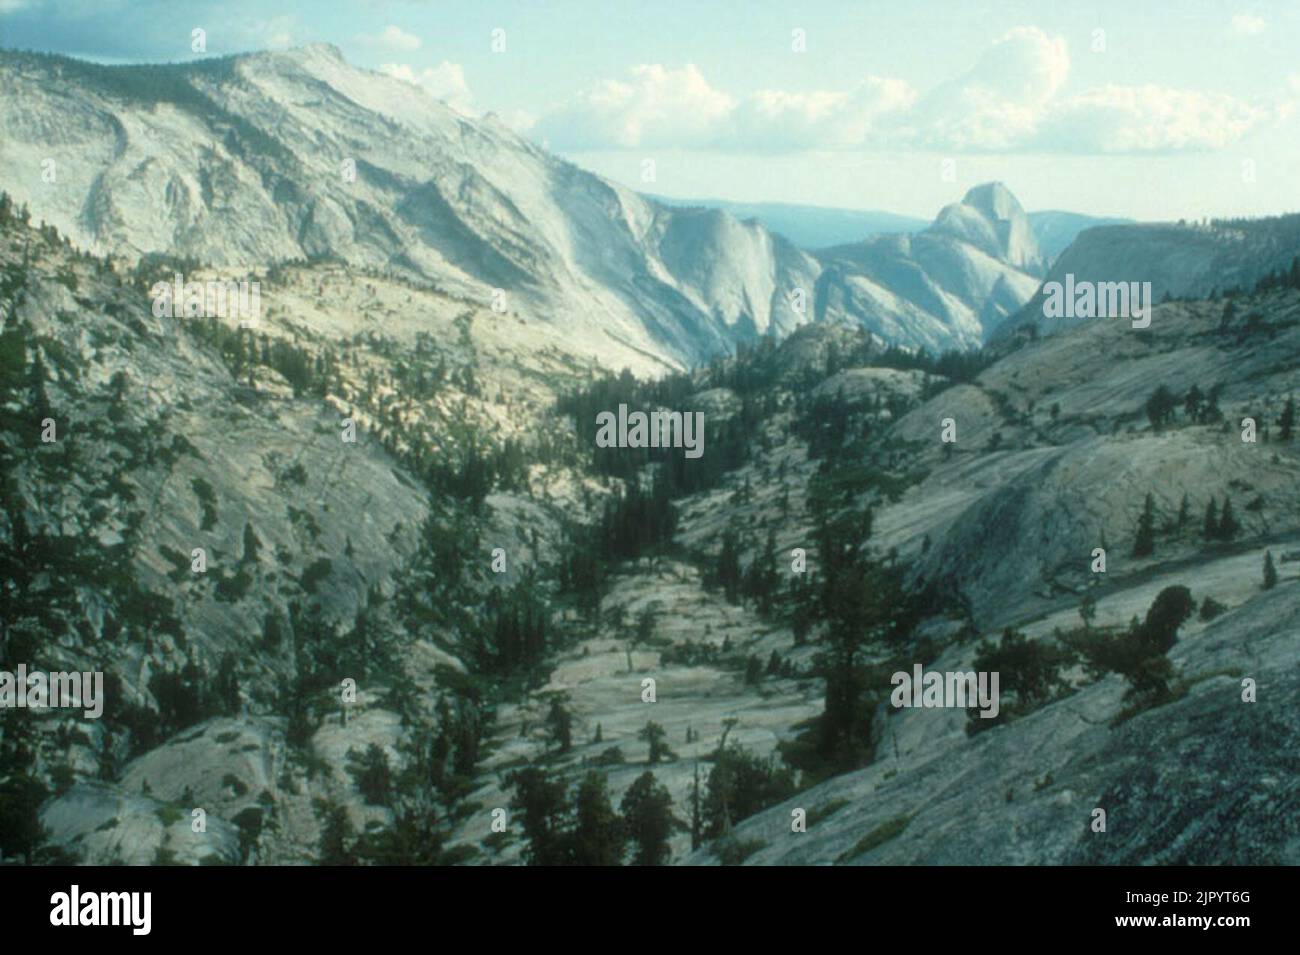 Tioga Road-Big Oak Flat Road - Half Dome from Olmsted Point Stock Photo